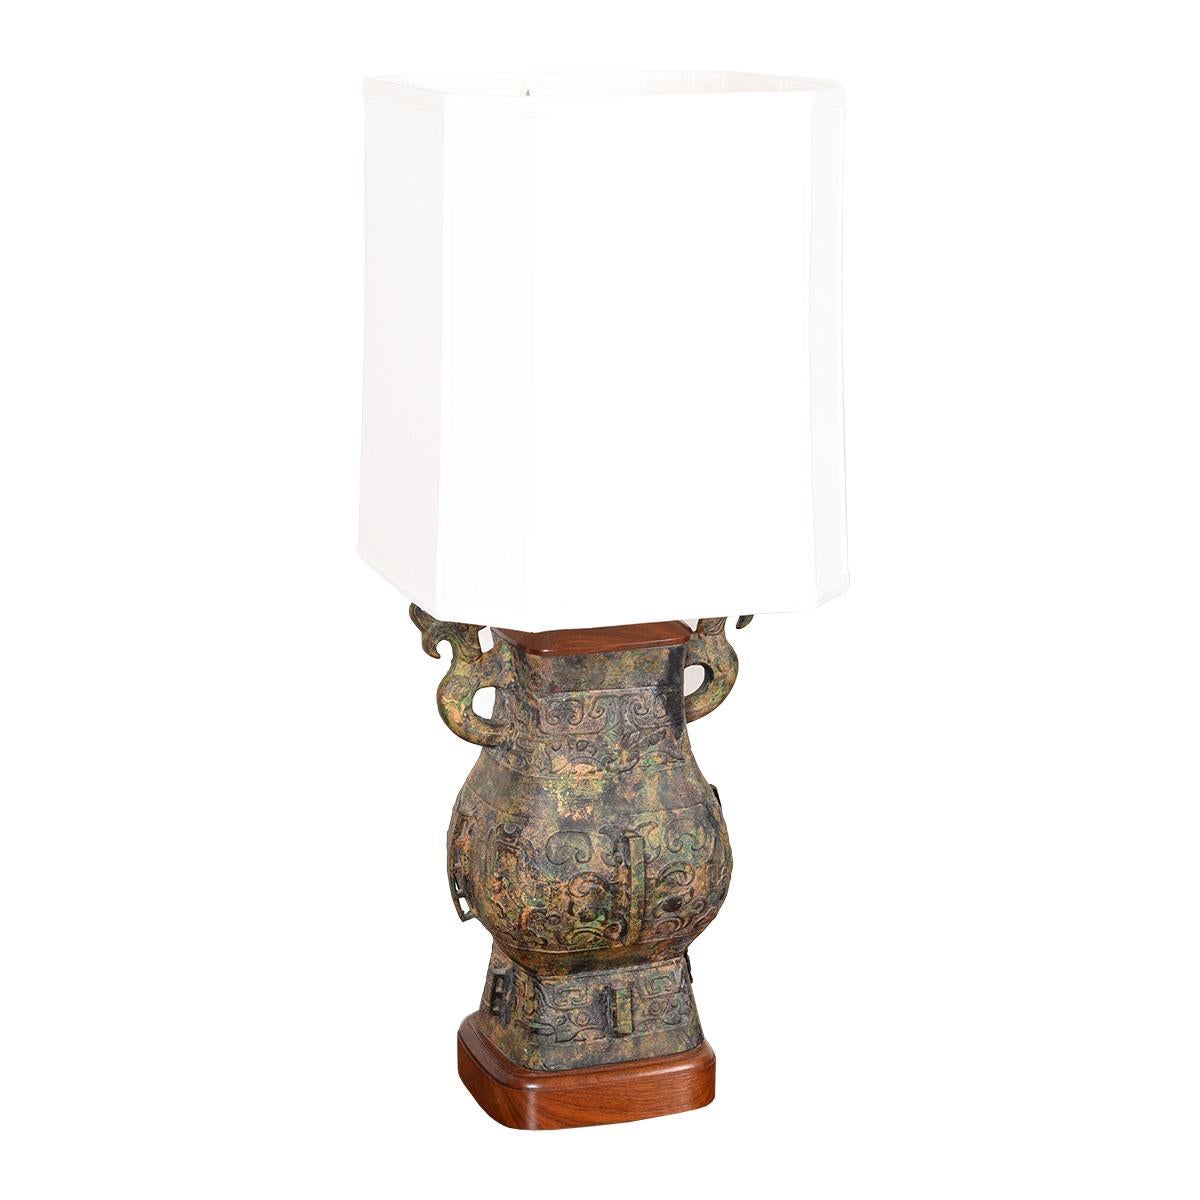 Large Asian-Inspired Walnut Accented Table Lamp

Additional information:
Material: Walnut
Very large MCM pottery lamp has an Asian influence in its shape. A great statment piece.

Dimension: Ø 8? x H 23?